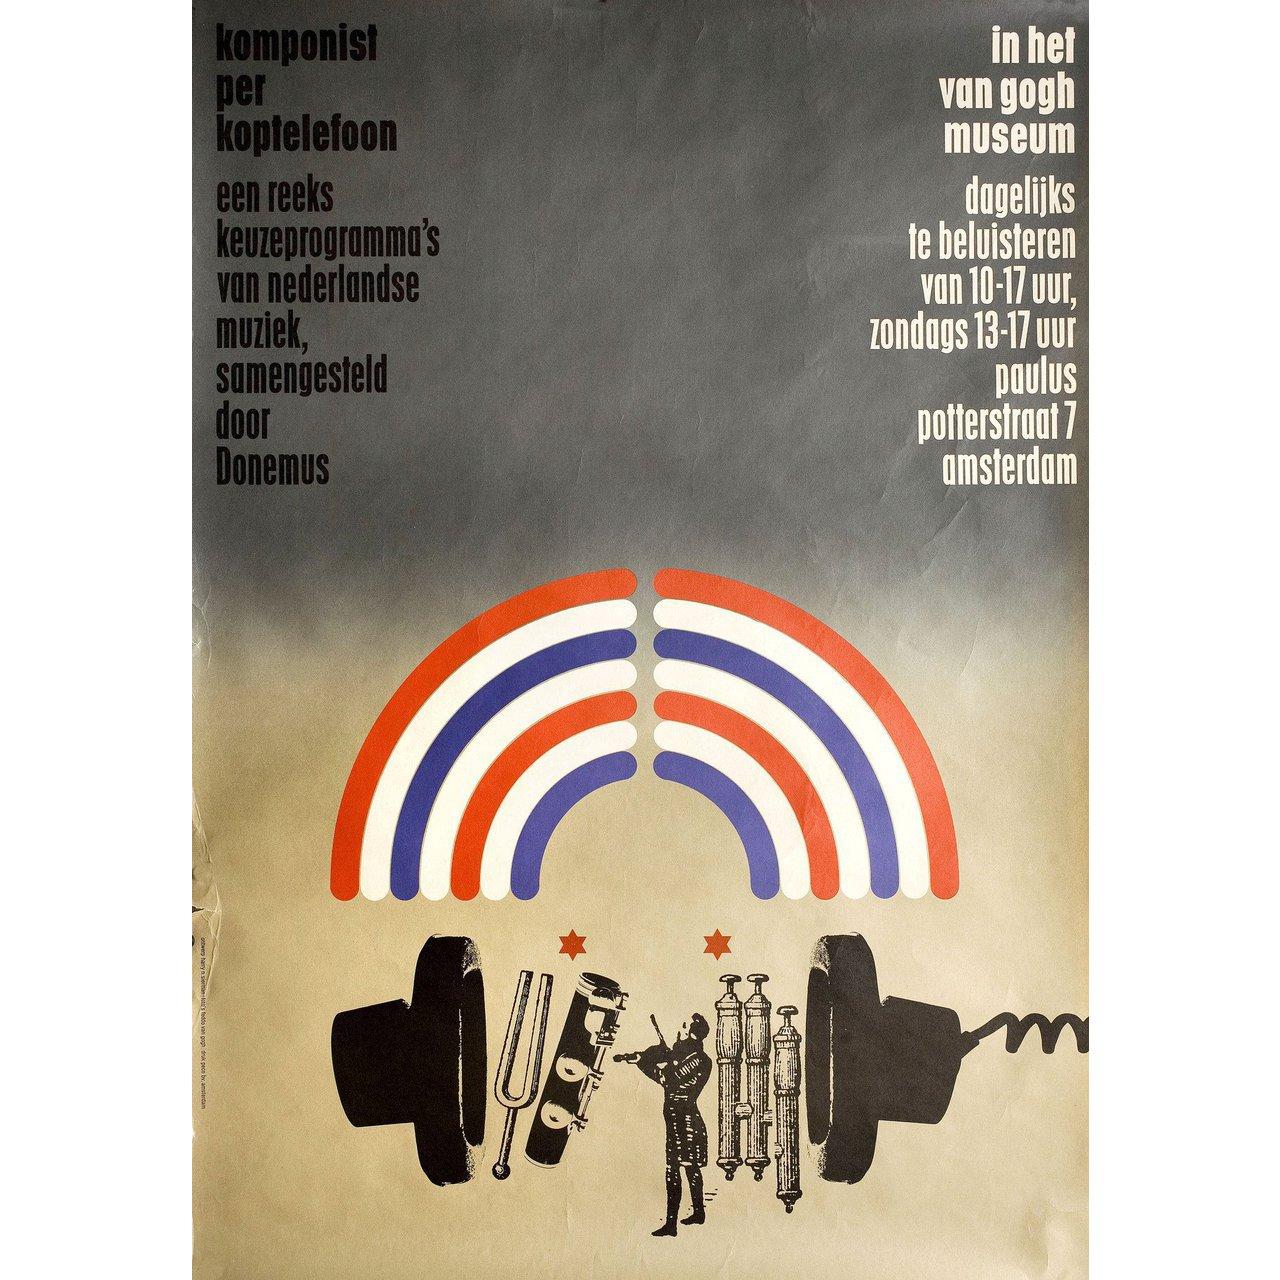 Komponist per Koptelefoon 1970s Dutch Poster In Good Condition For Sale In New York, NY